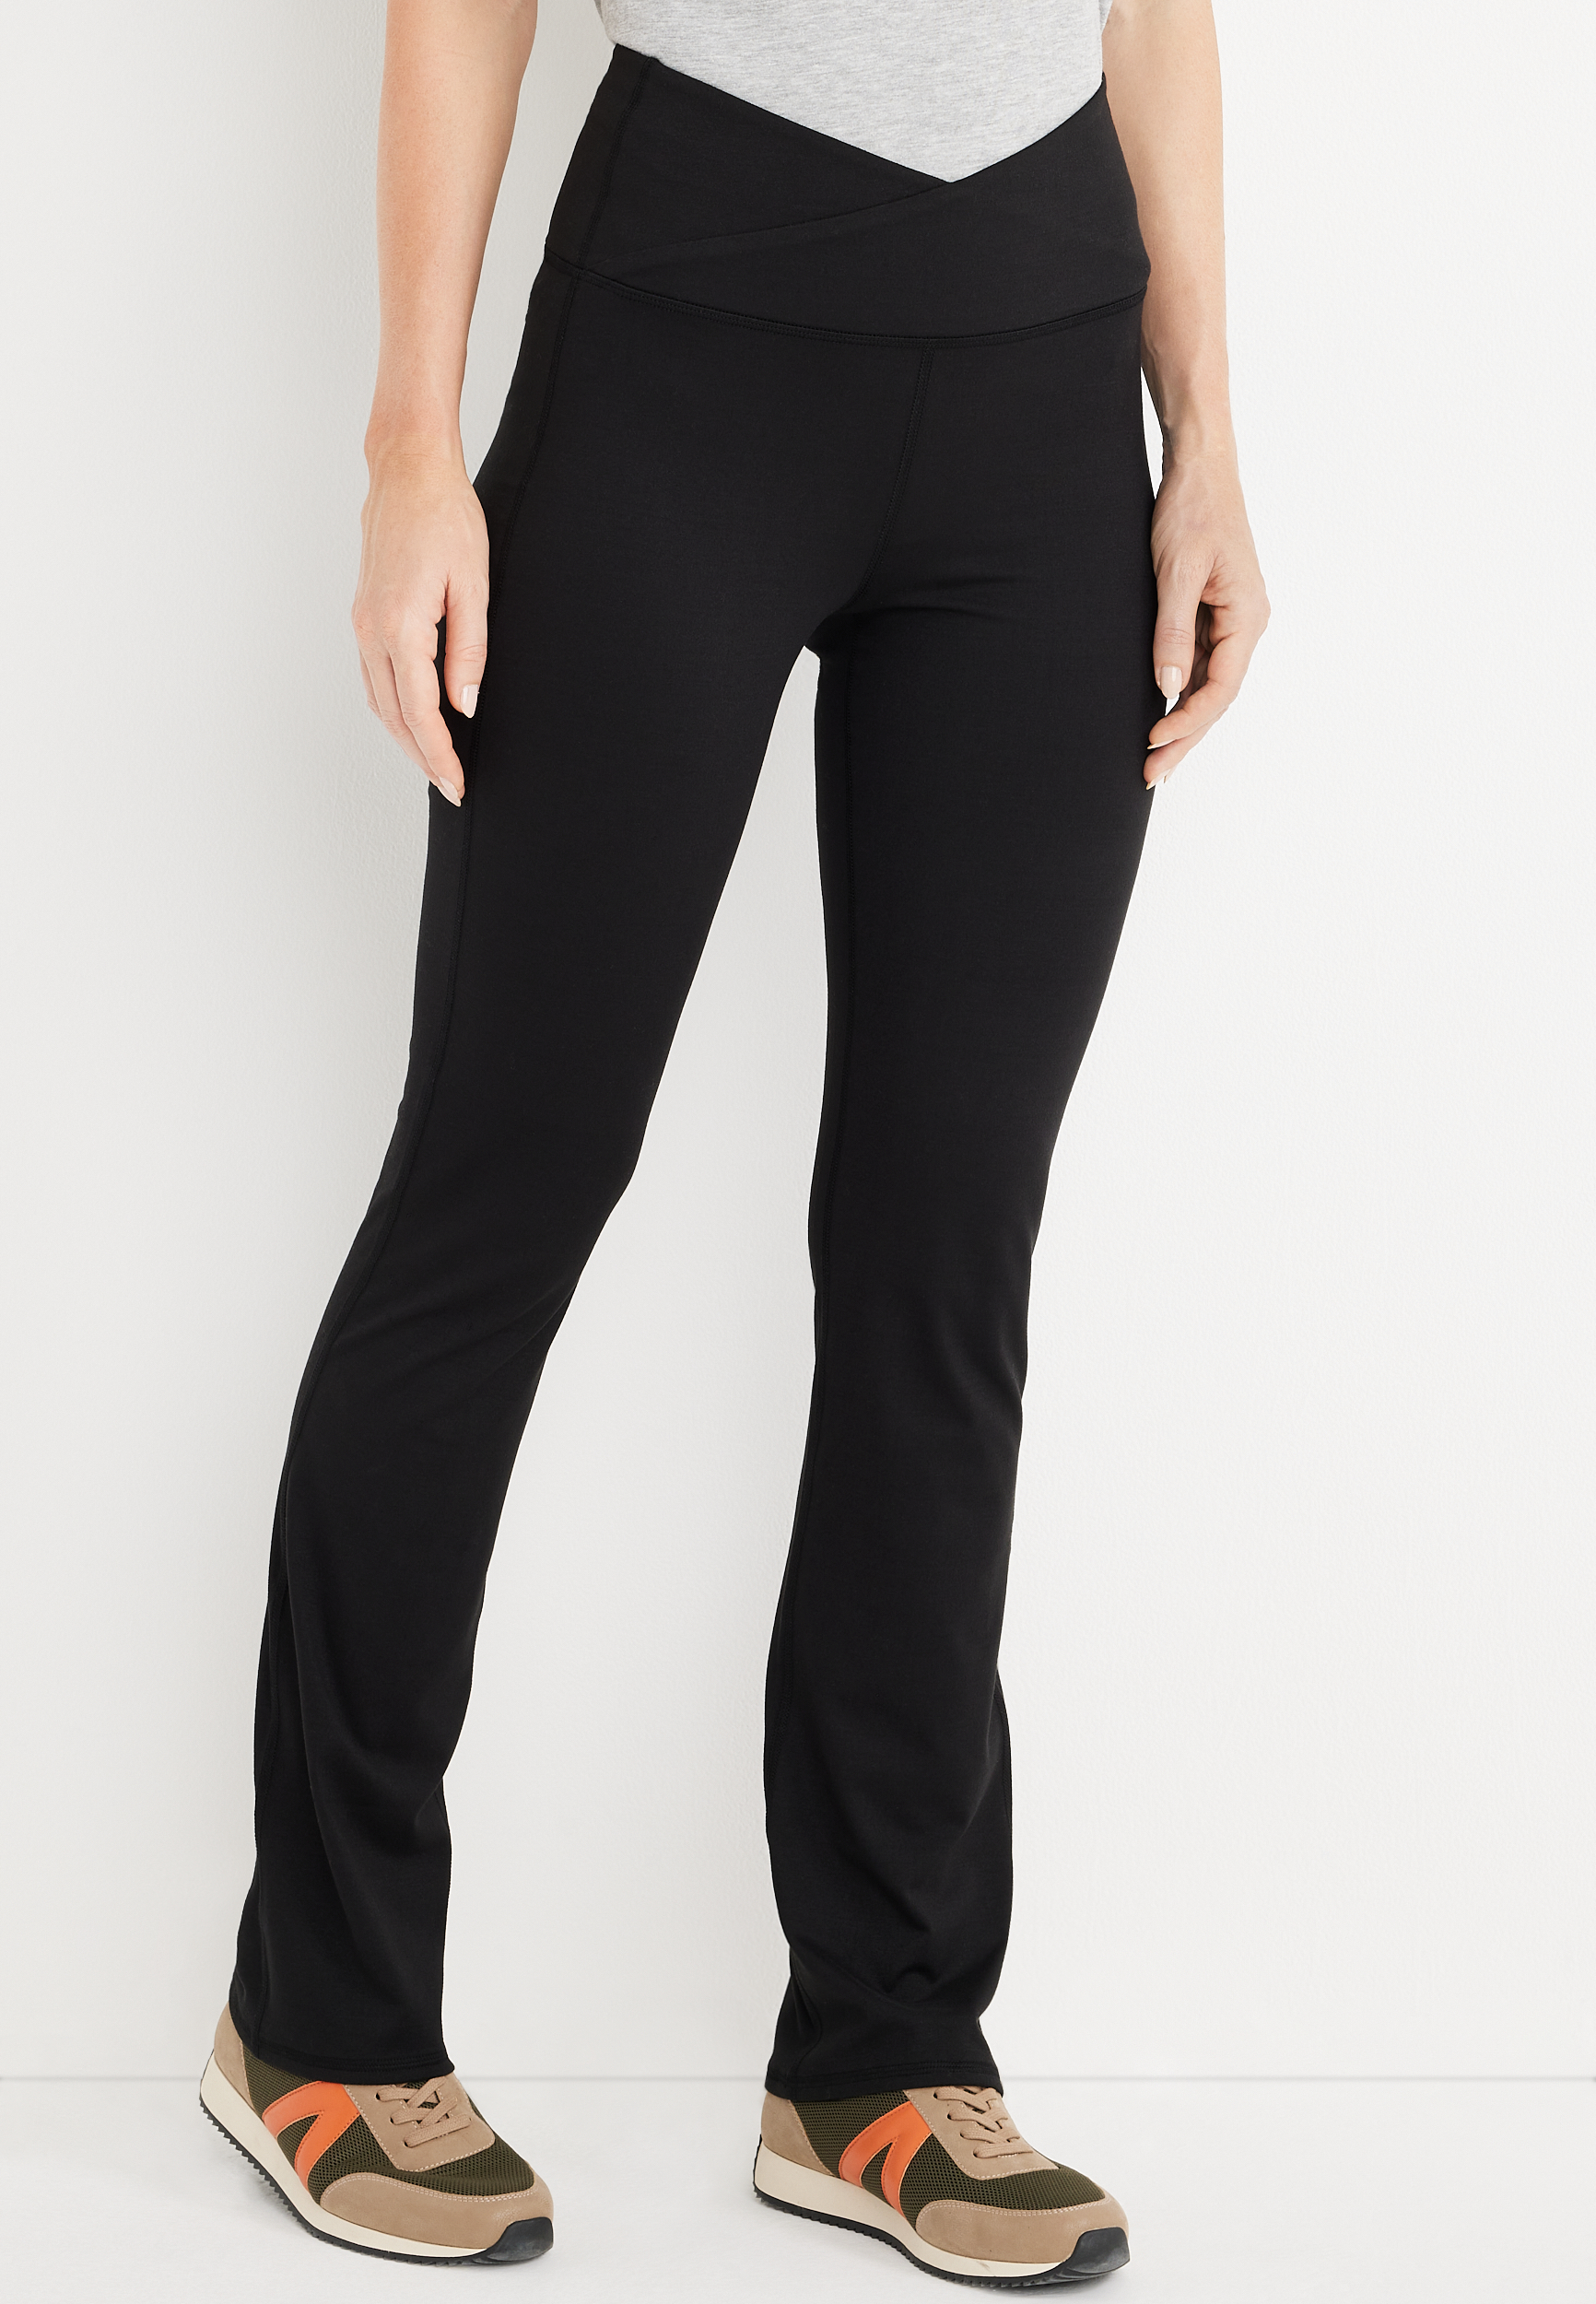 C99-11-1058-00XR MAURICES ULTRA HIGH RISE BLACK SIDE POCKET LUXE